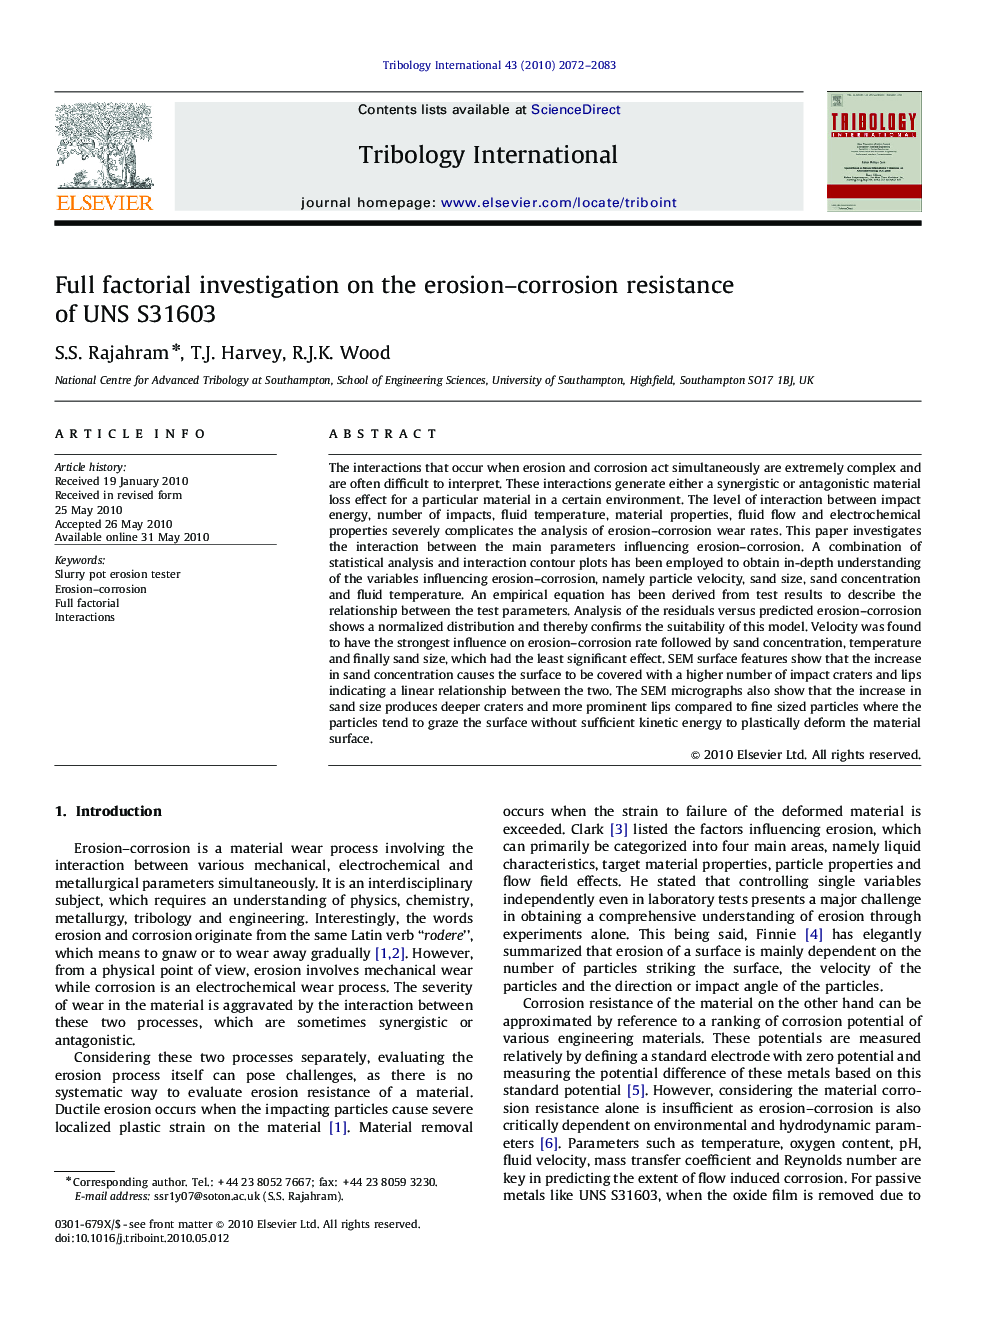 Full factorial investigation on the erosion–corrosion resistance of UNS S31603